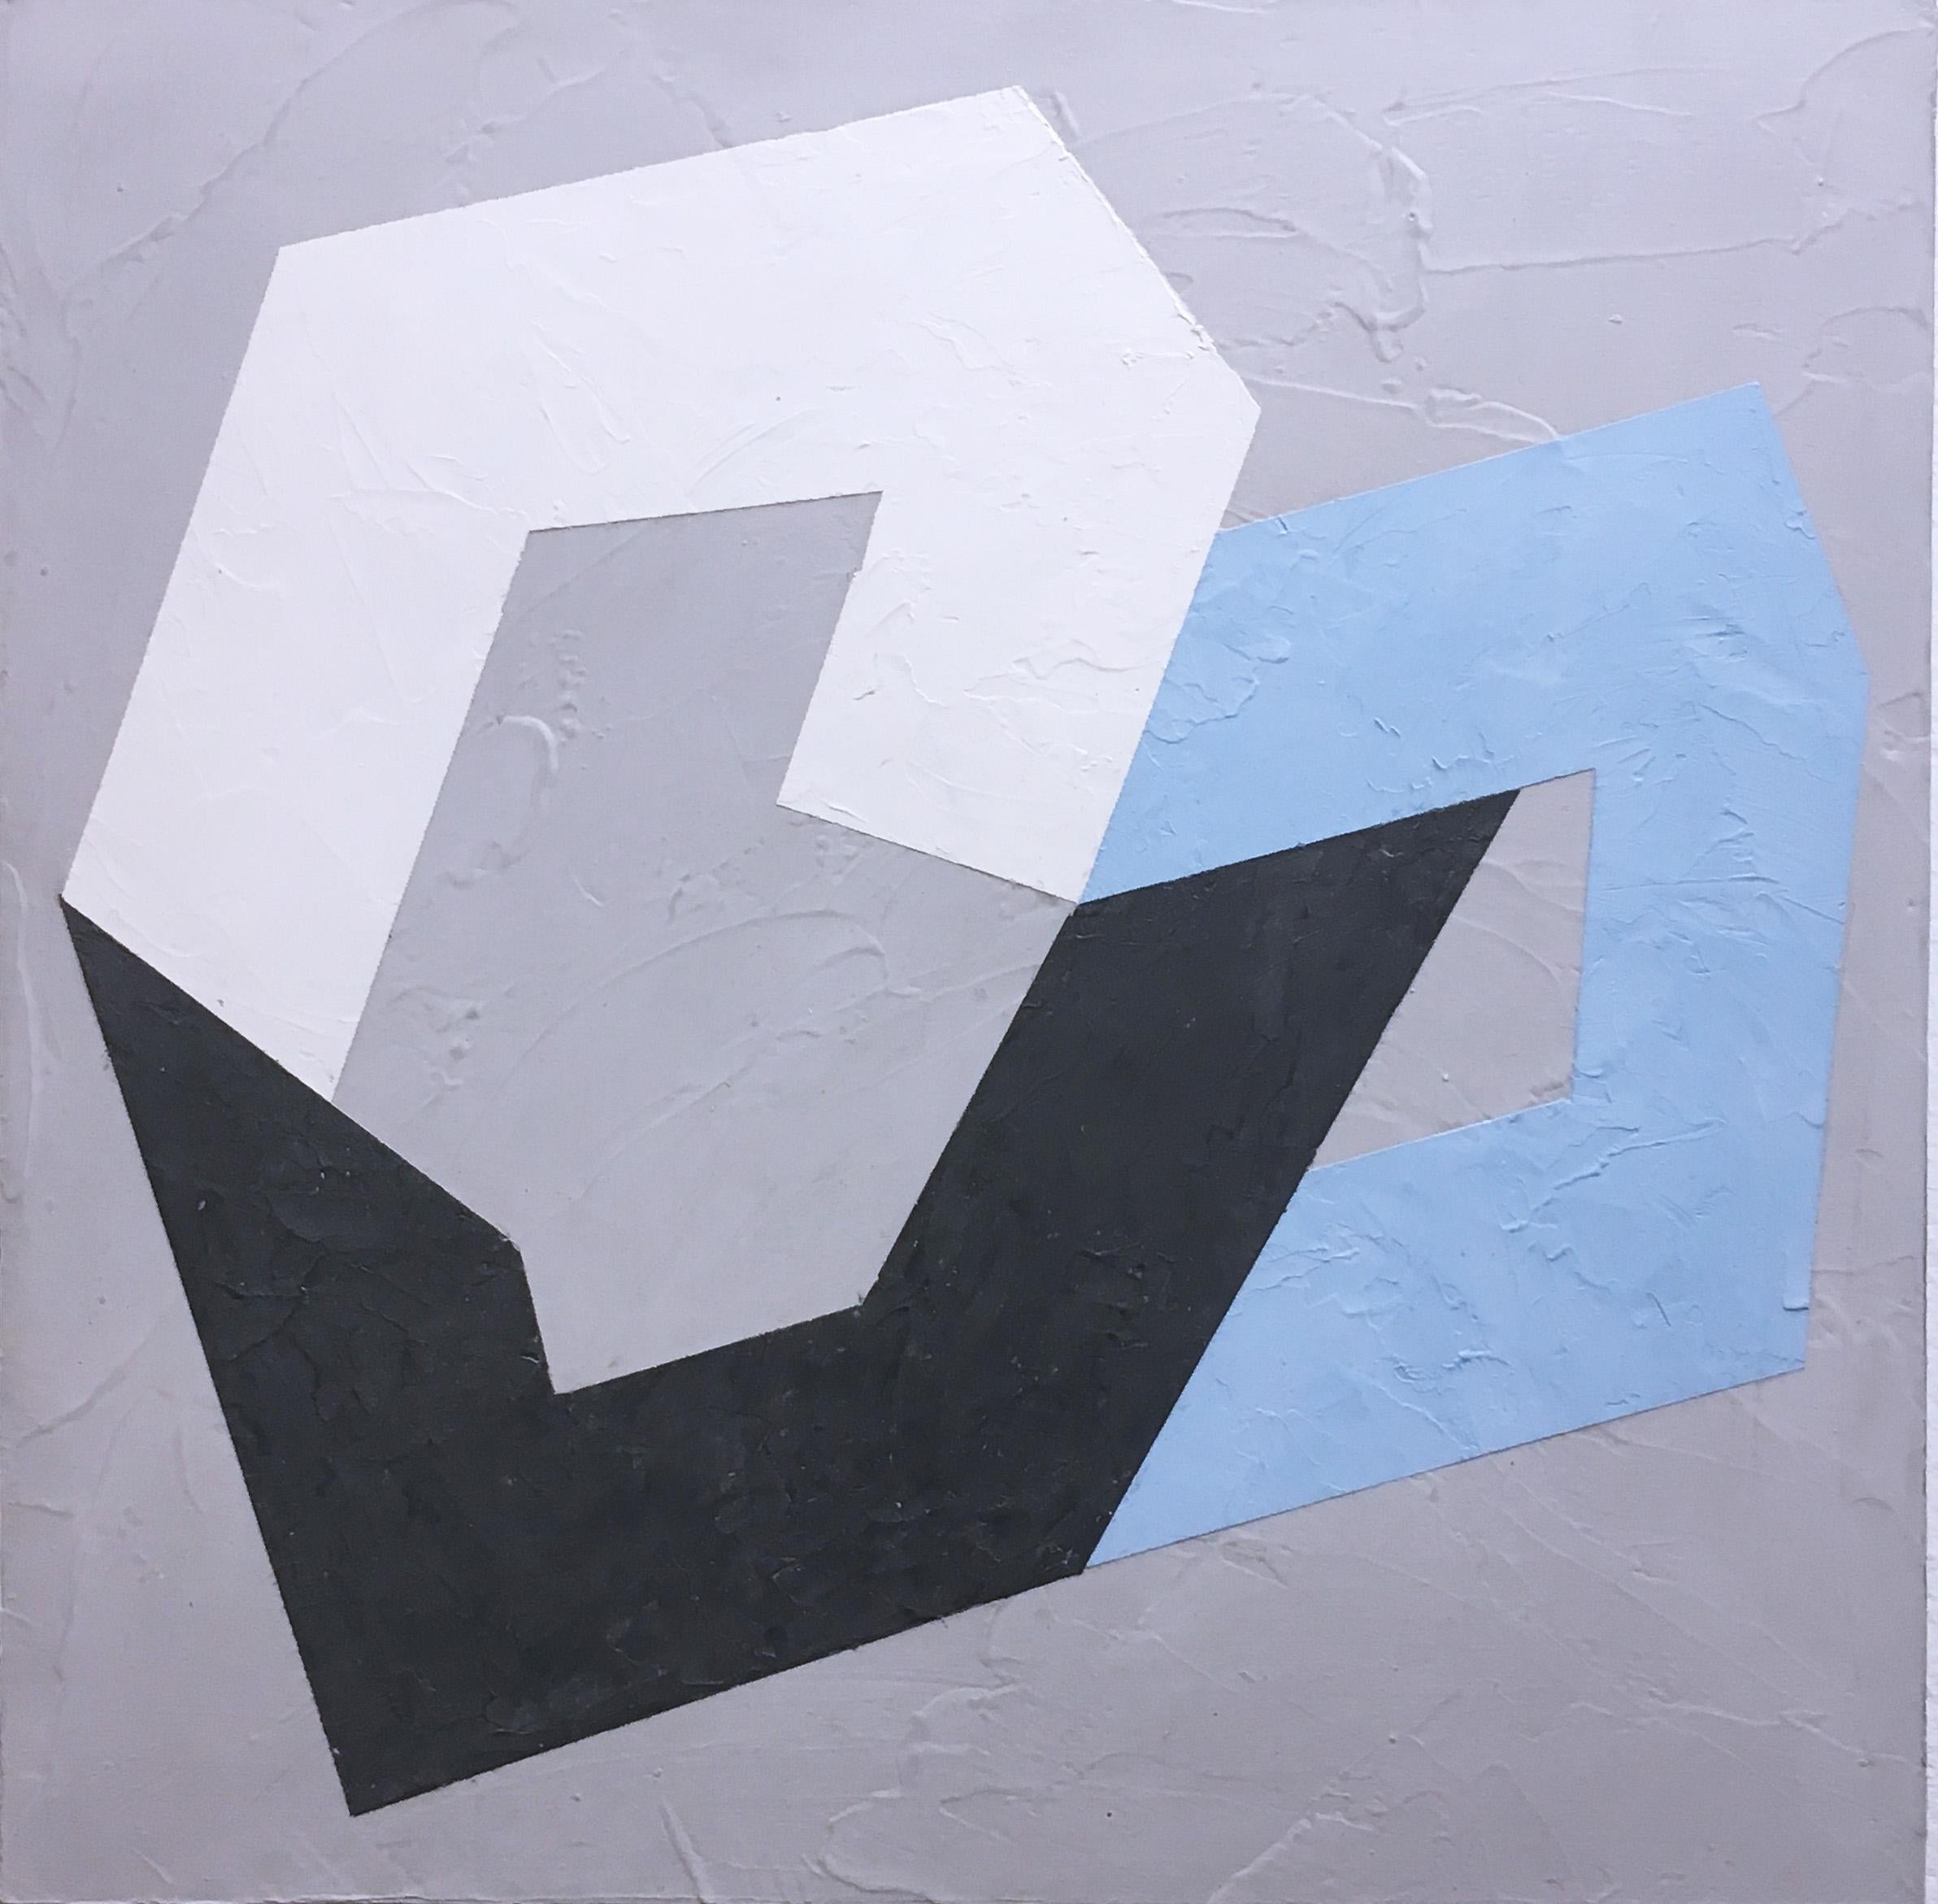 Options VIII, 2020, Abstract geometry, non-objective, plaster, gray, blue, white